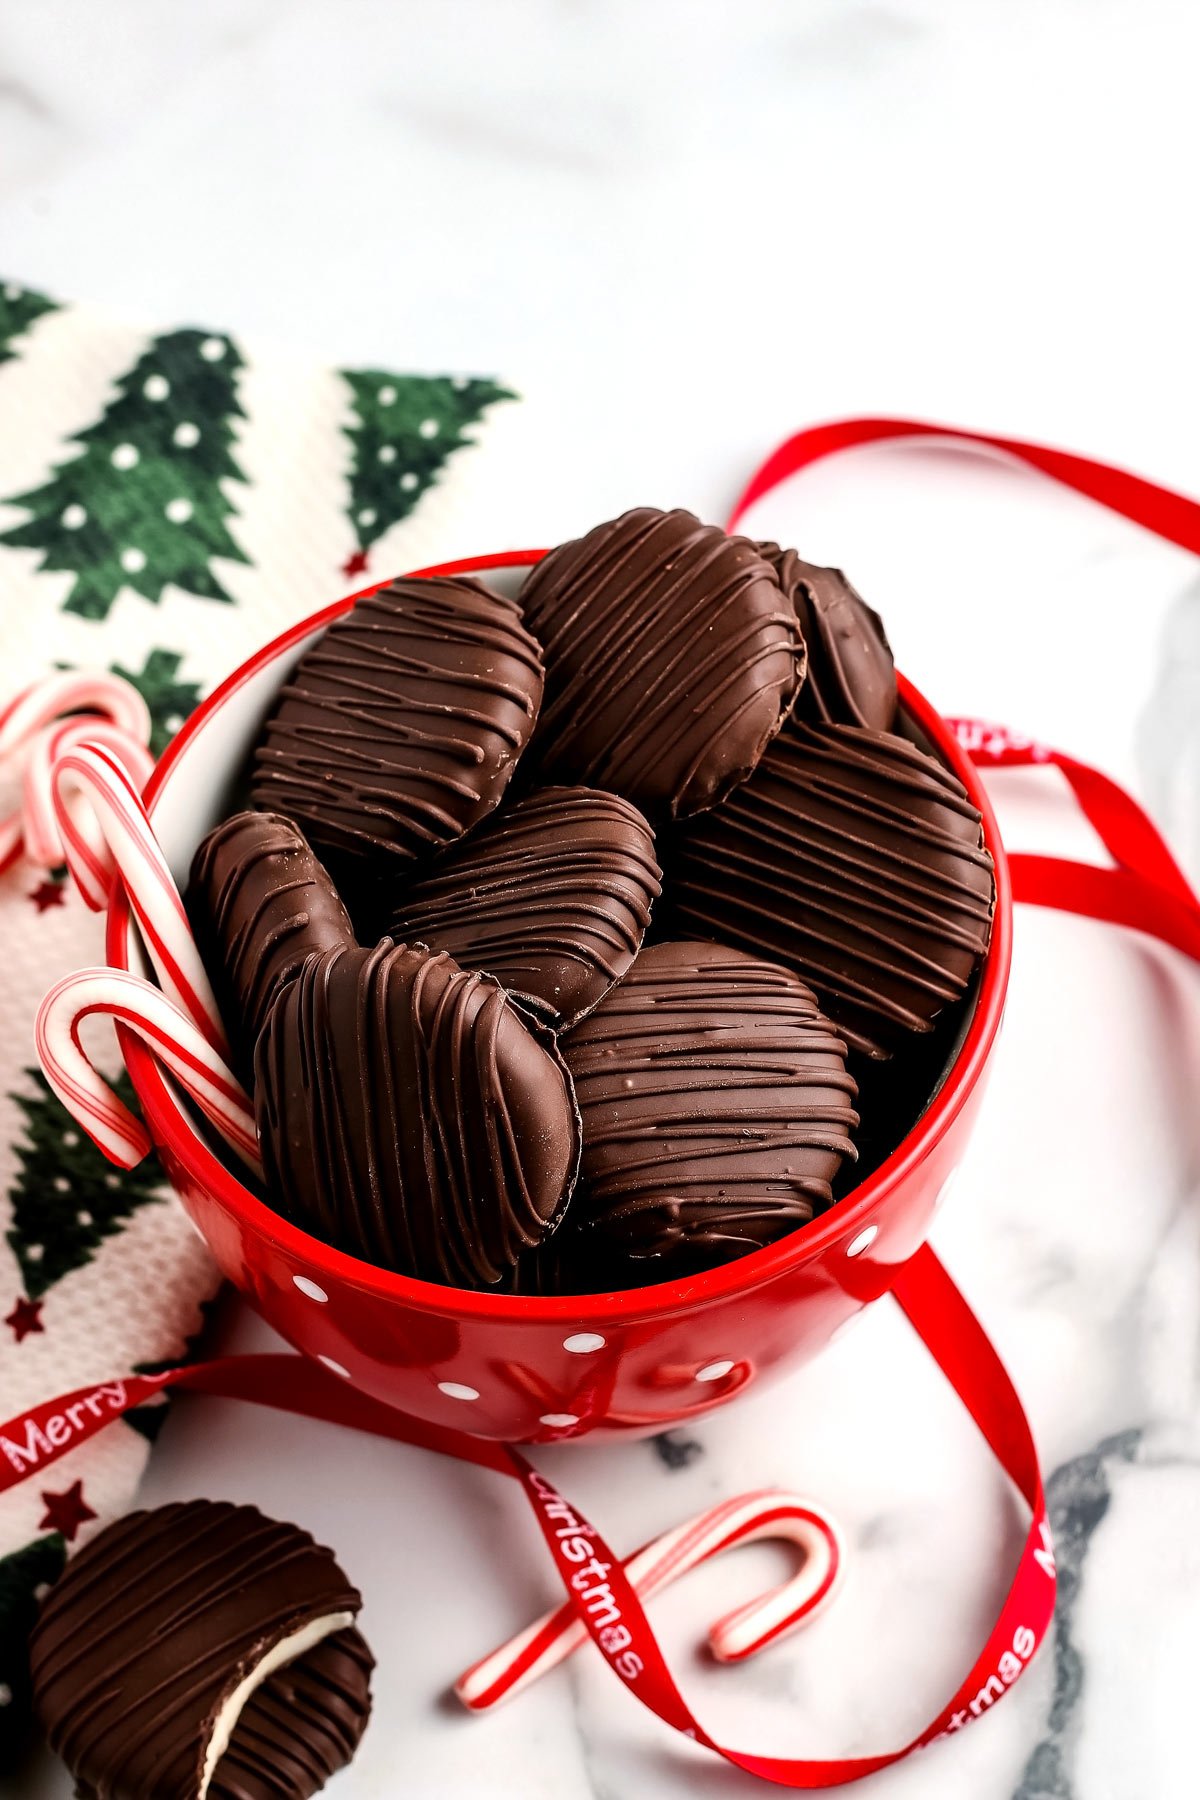 This homemade Peppermint Patty Candy is a refreshing holiday treat perfect for Christmas cookie trays and gifting. These Peppermint Patties have a creamy peppermint center that’s covered in semi-sweet chocolate. via @foodfolksandfun